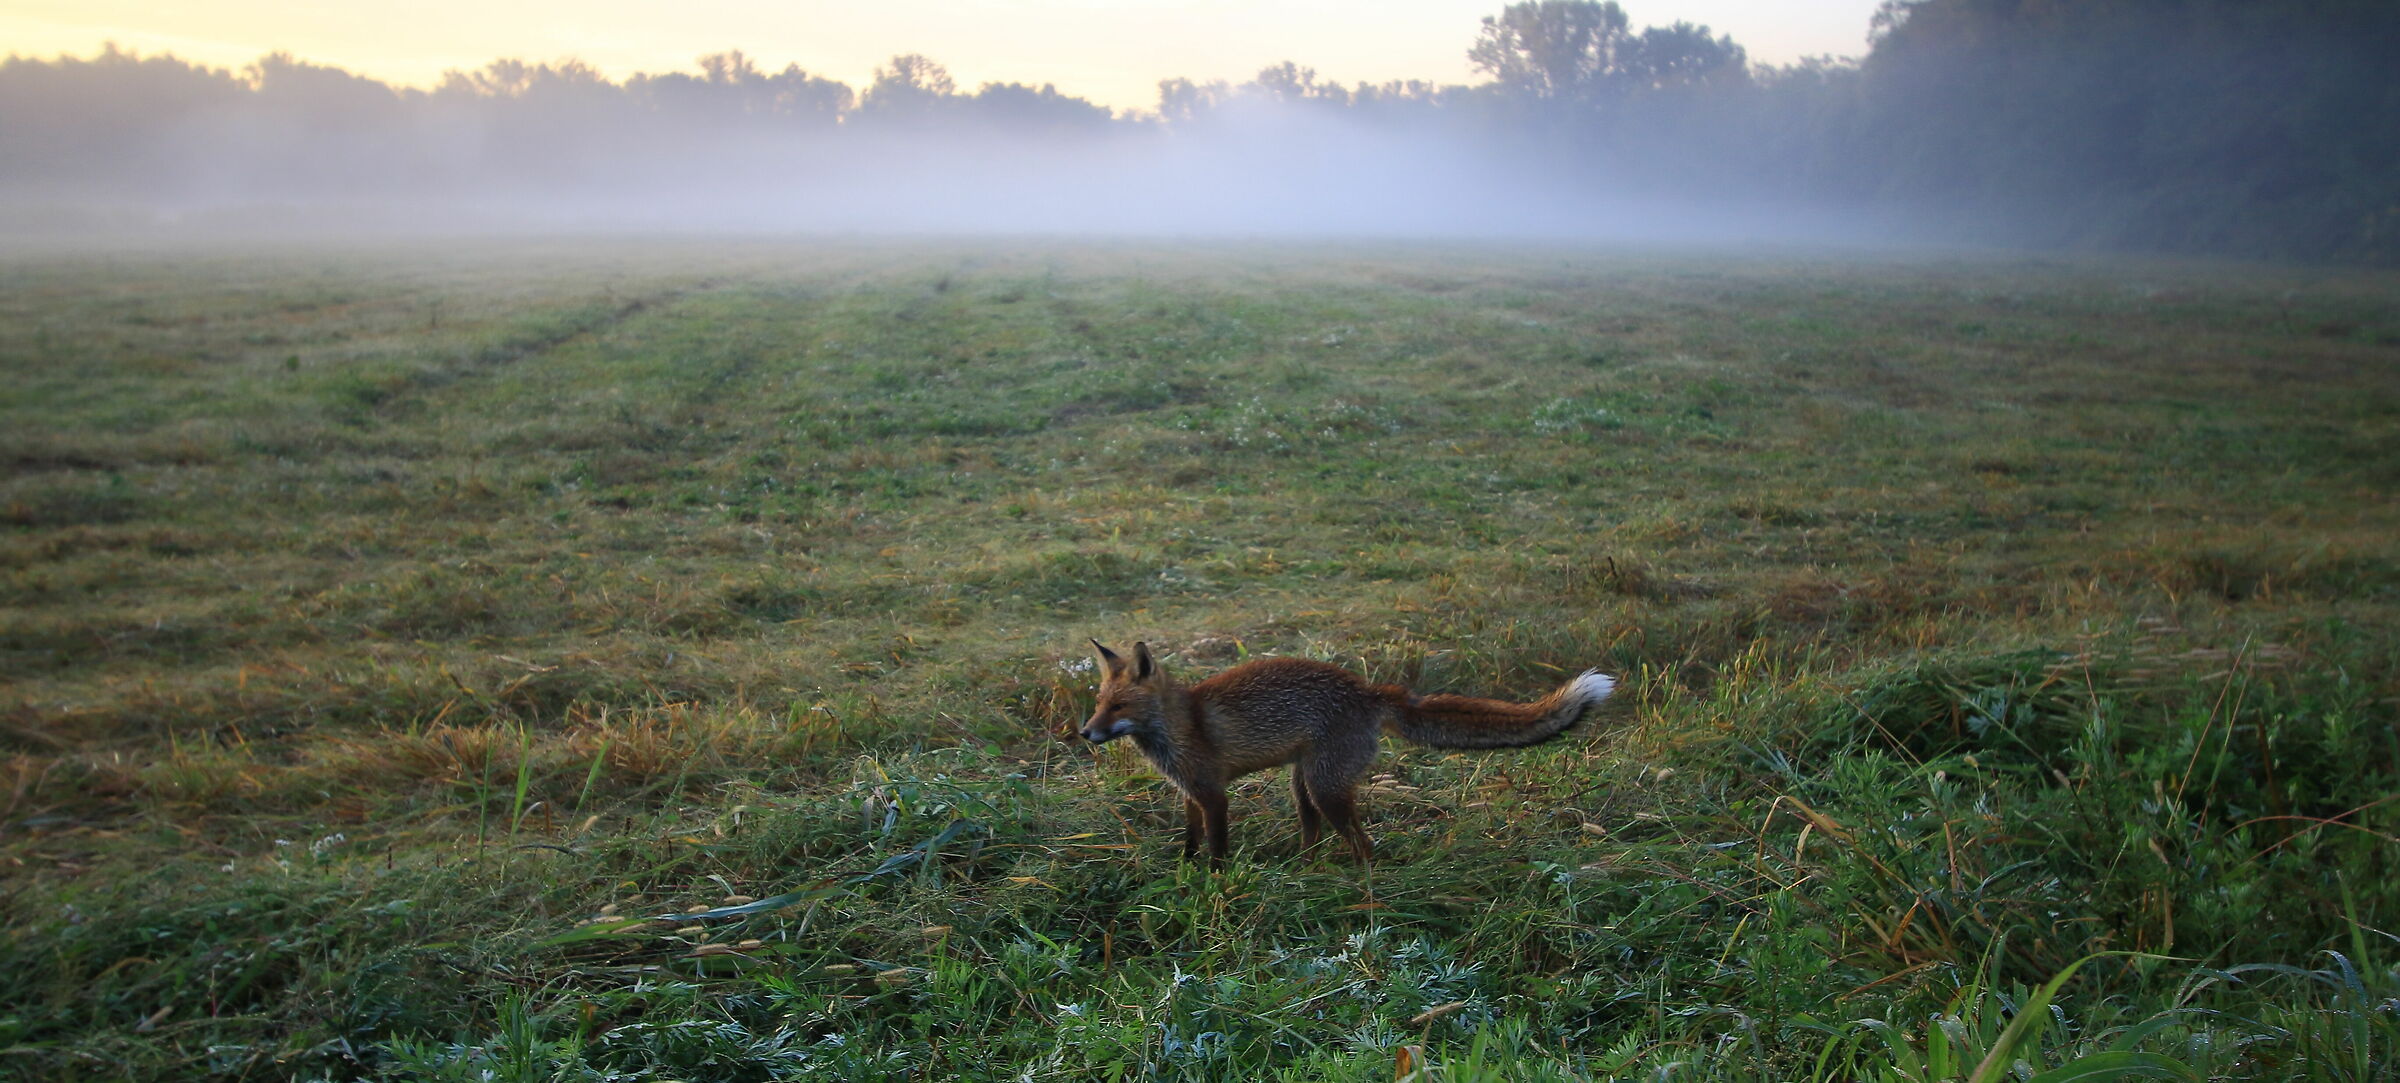 The Fox on the Hunt in the Morning ...